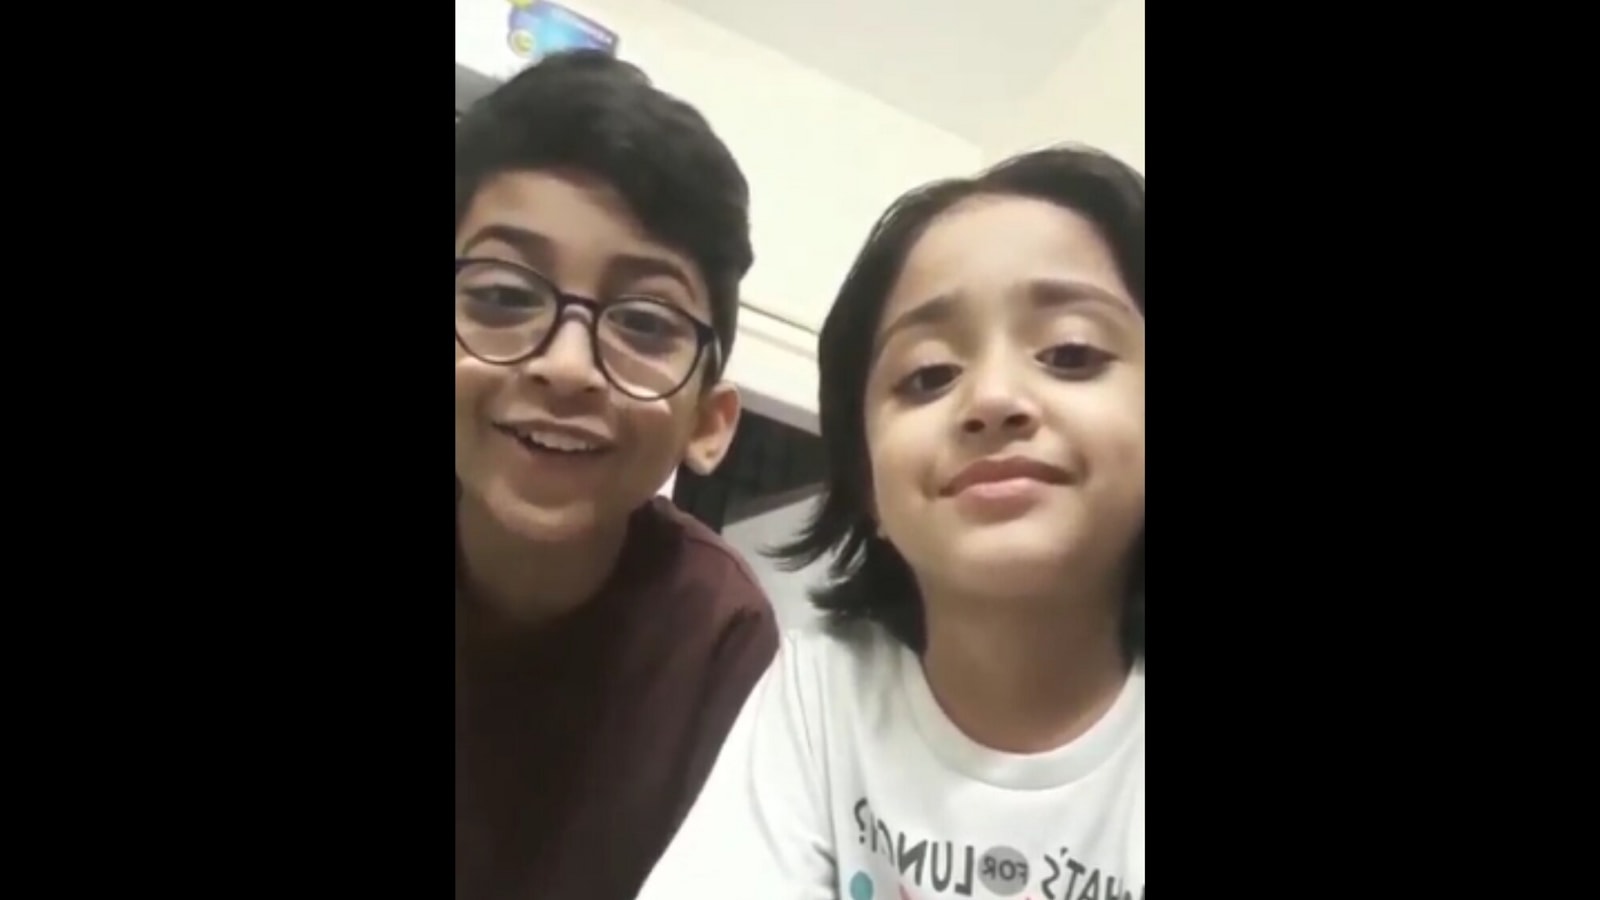 Rasian Sister Forced Mms - Cute little brother-sister duo's video goes viral, Yashraj Mukhate reacts.  Watch | Trending - Hindustan Times